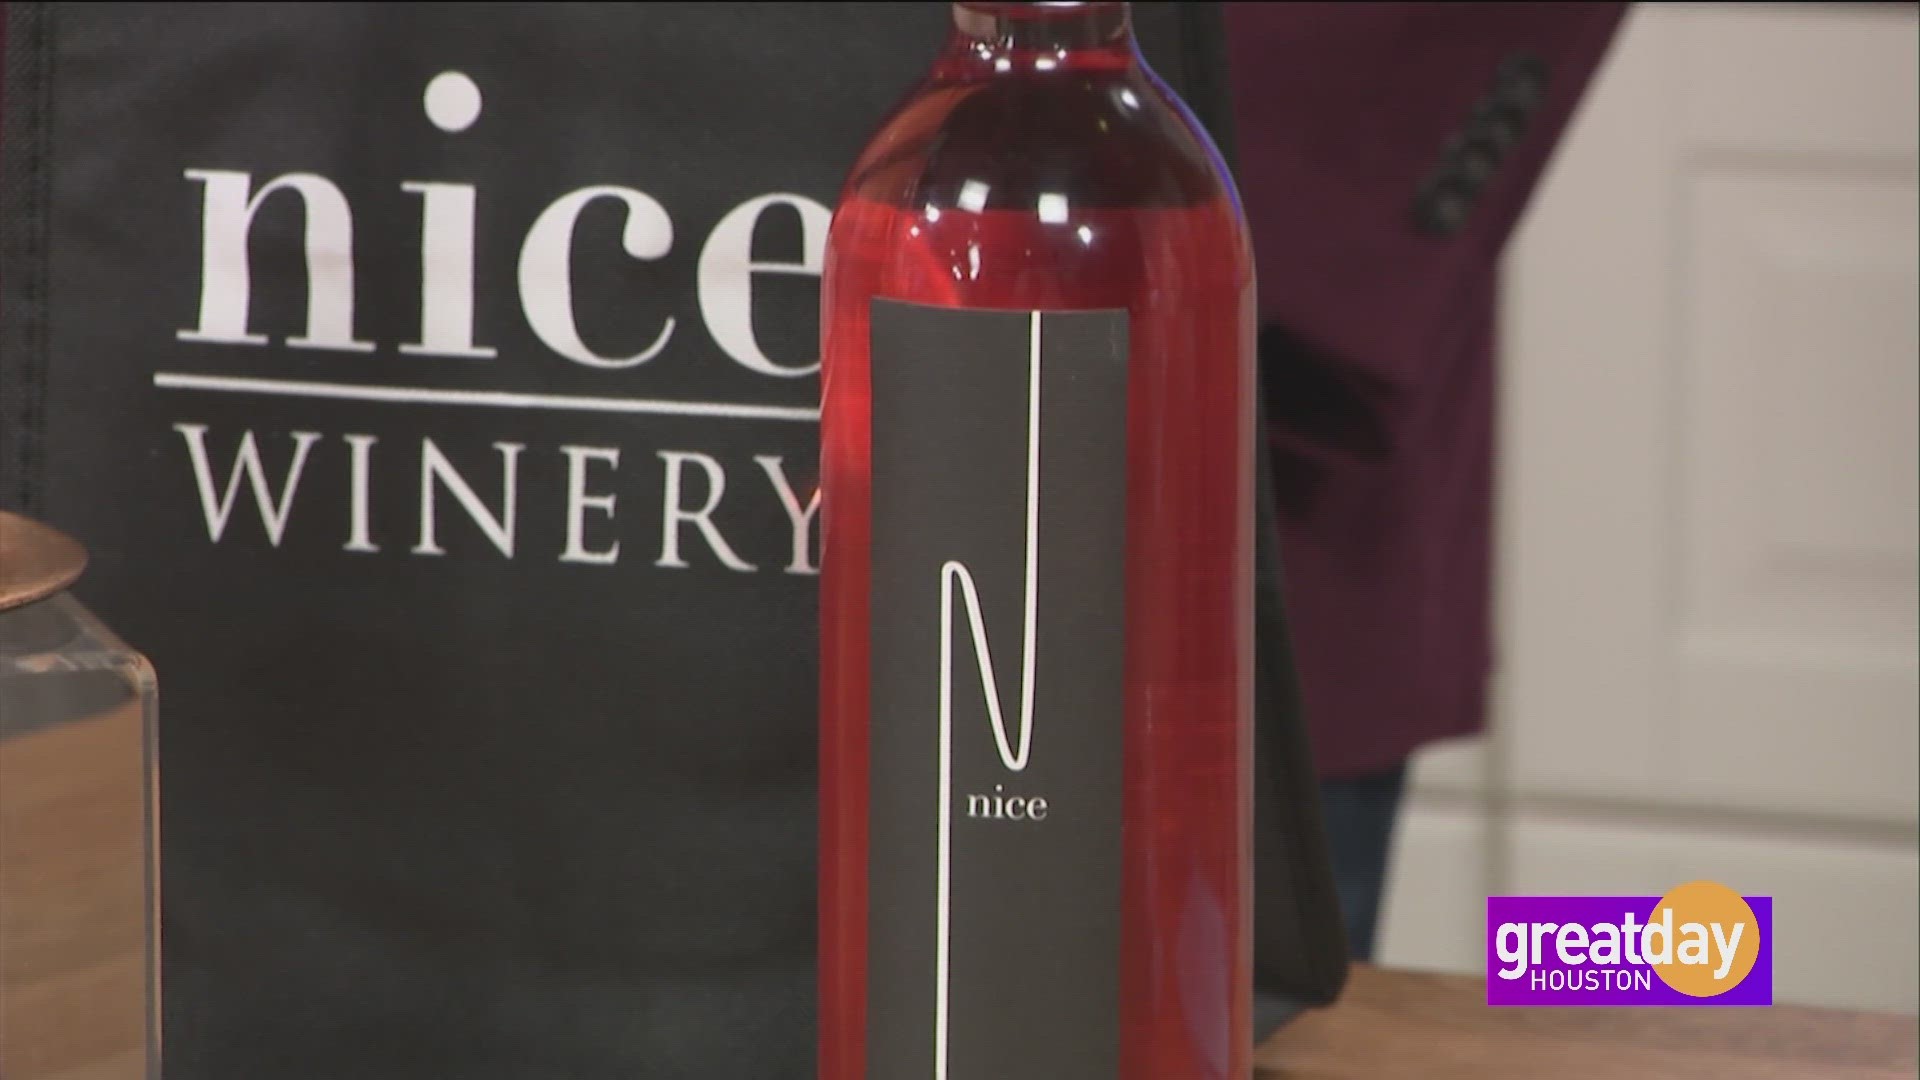 When you buy a bottle or case of nice winery's rose, find out how 100% of the proceeds will help give women access to life saving mammograms.